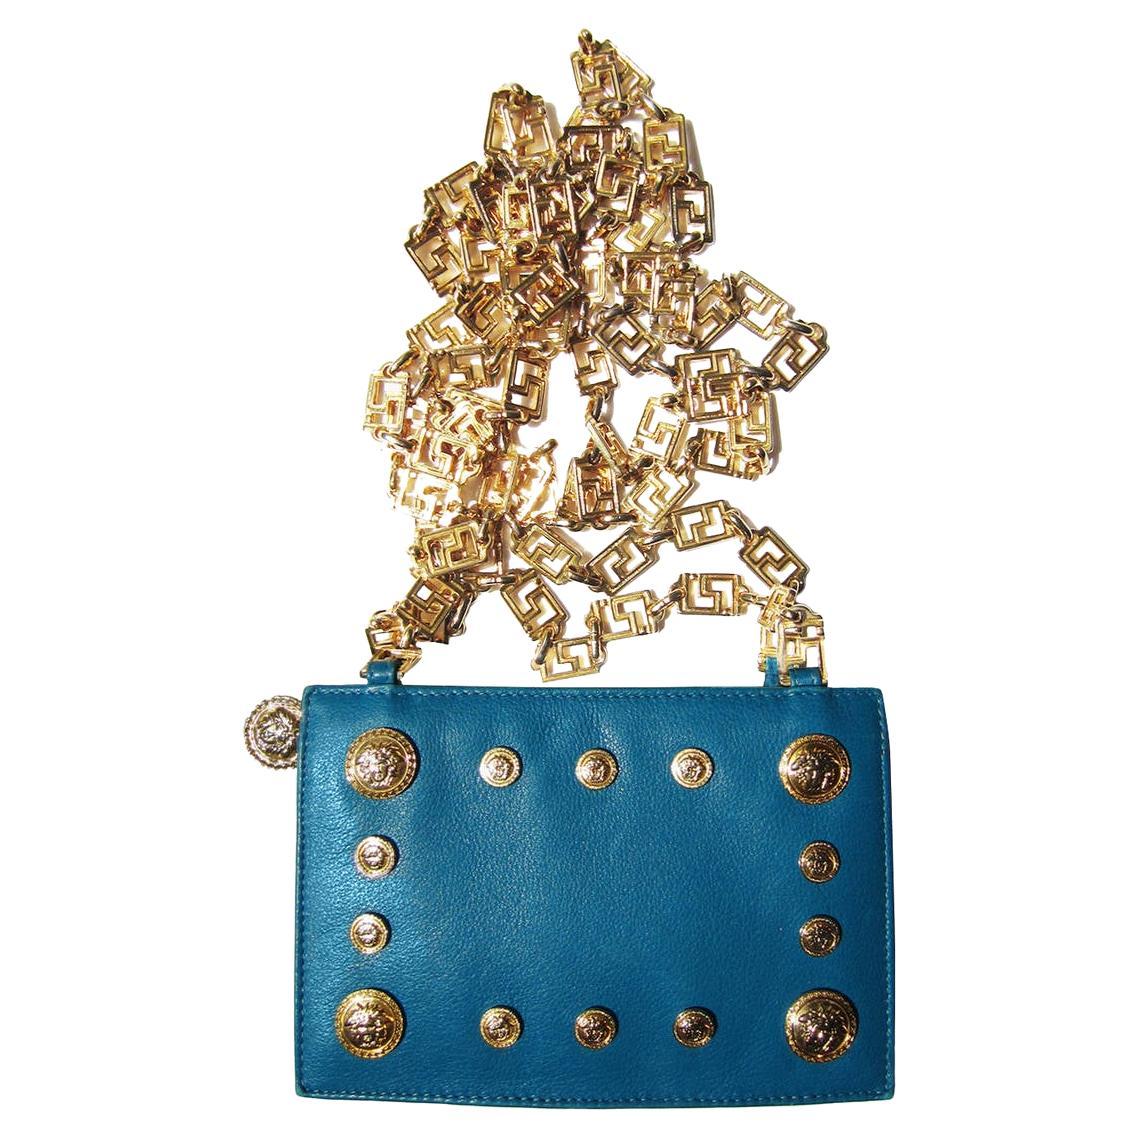 Gianni Versace Couture bright turquoise with golden hardwear chain purse from 
circa 1990s.

Sz : 11,5 x 17 x 4,5 cm
Total length shoulder chain 116 cm